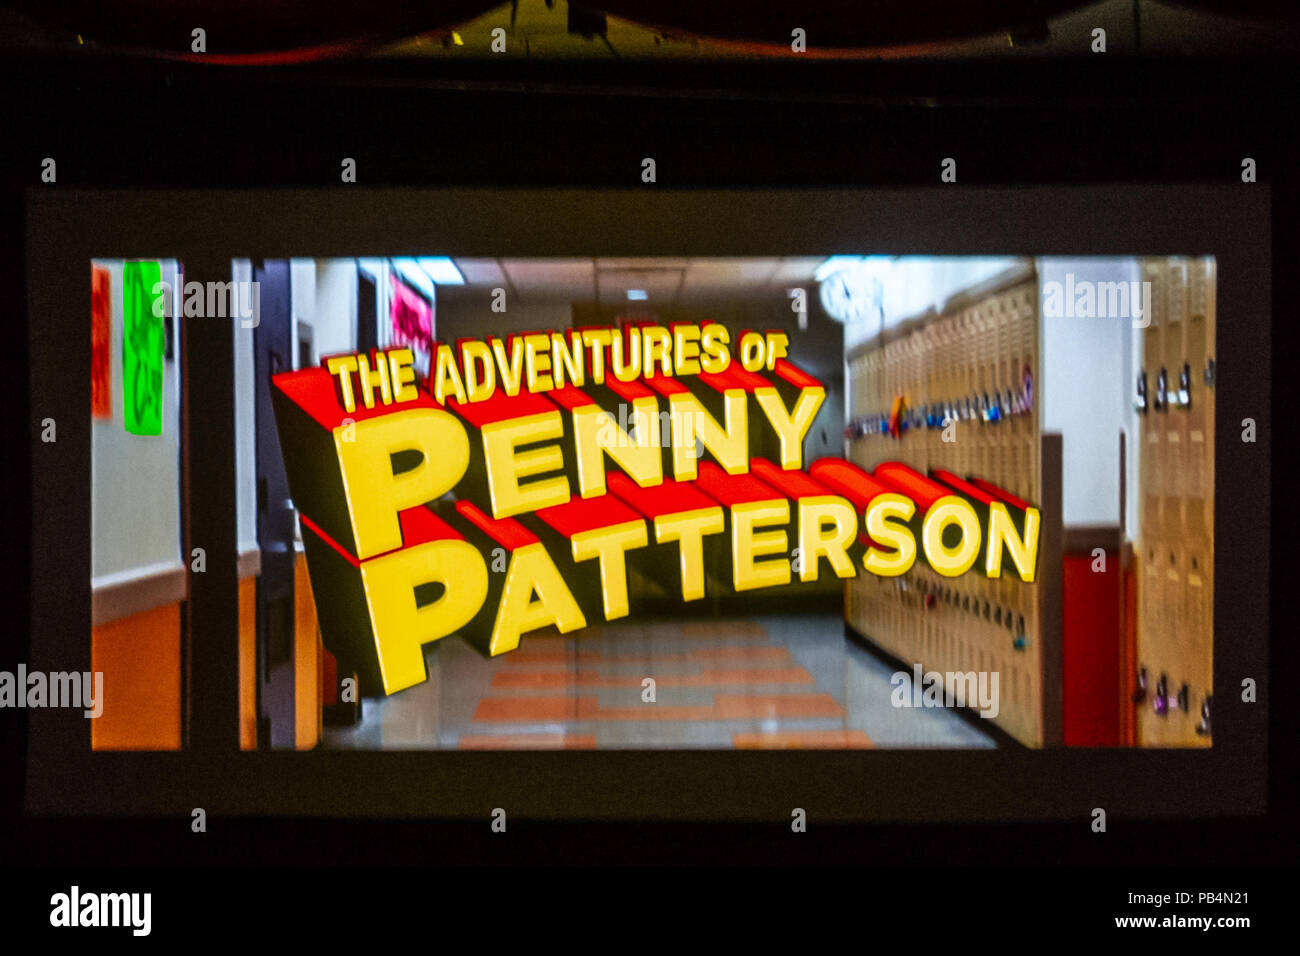 Bellmore, New York, USA. July 18, 2018. Title of comedy sci-fi The Adventures of Penny Patterson, flashes on high school hallway at start of the woman directed film, at LIIFE 2018, the Long Island International Film Expo. The movie, about a high school student facing obstacles to winning science fair when her boyfriend suddenly becomes a superhero, was nominated at LIIFE for Best Student Film, and is screening July 21 at the San Diego Comic-Con International Independent Film Festival, CCI-IFF 2018. Stock Photo